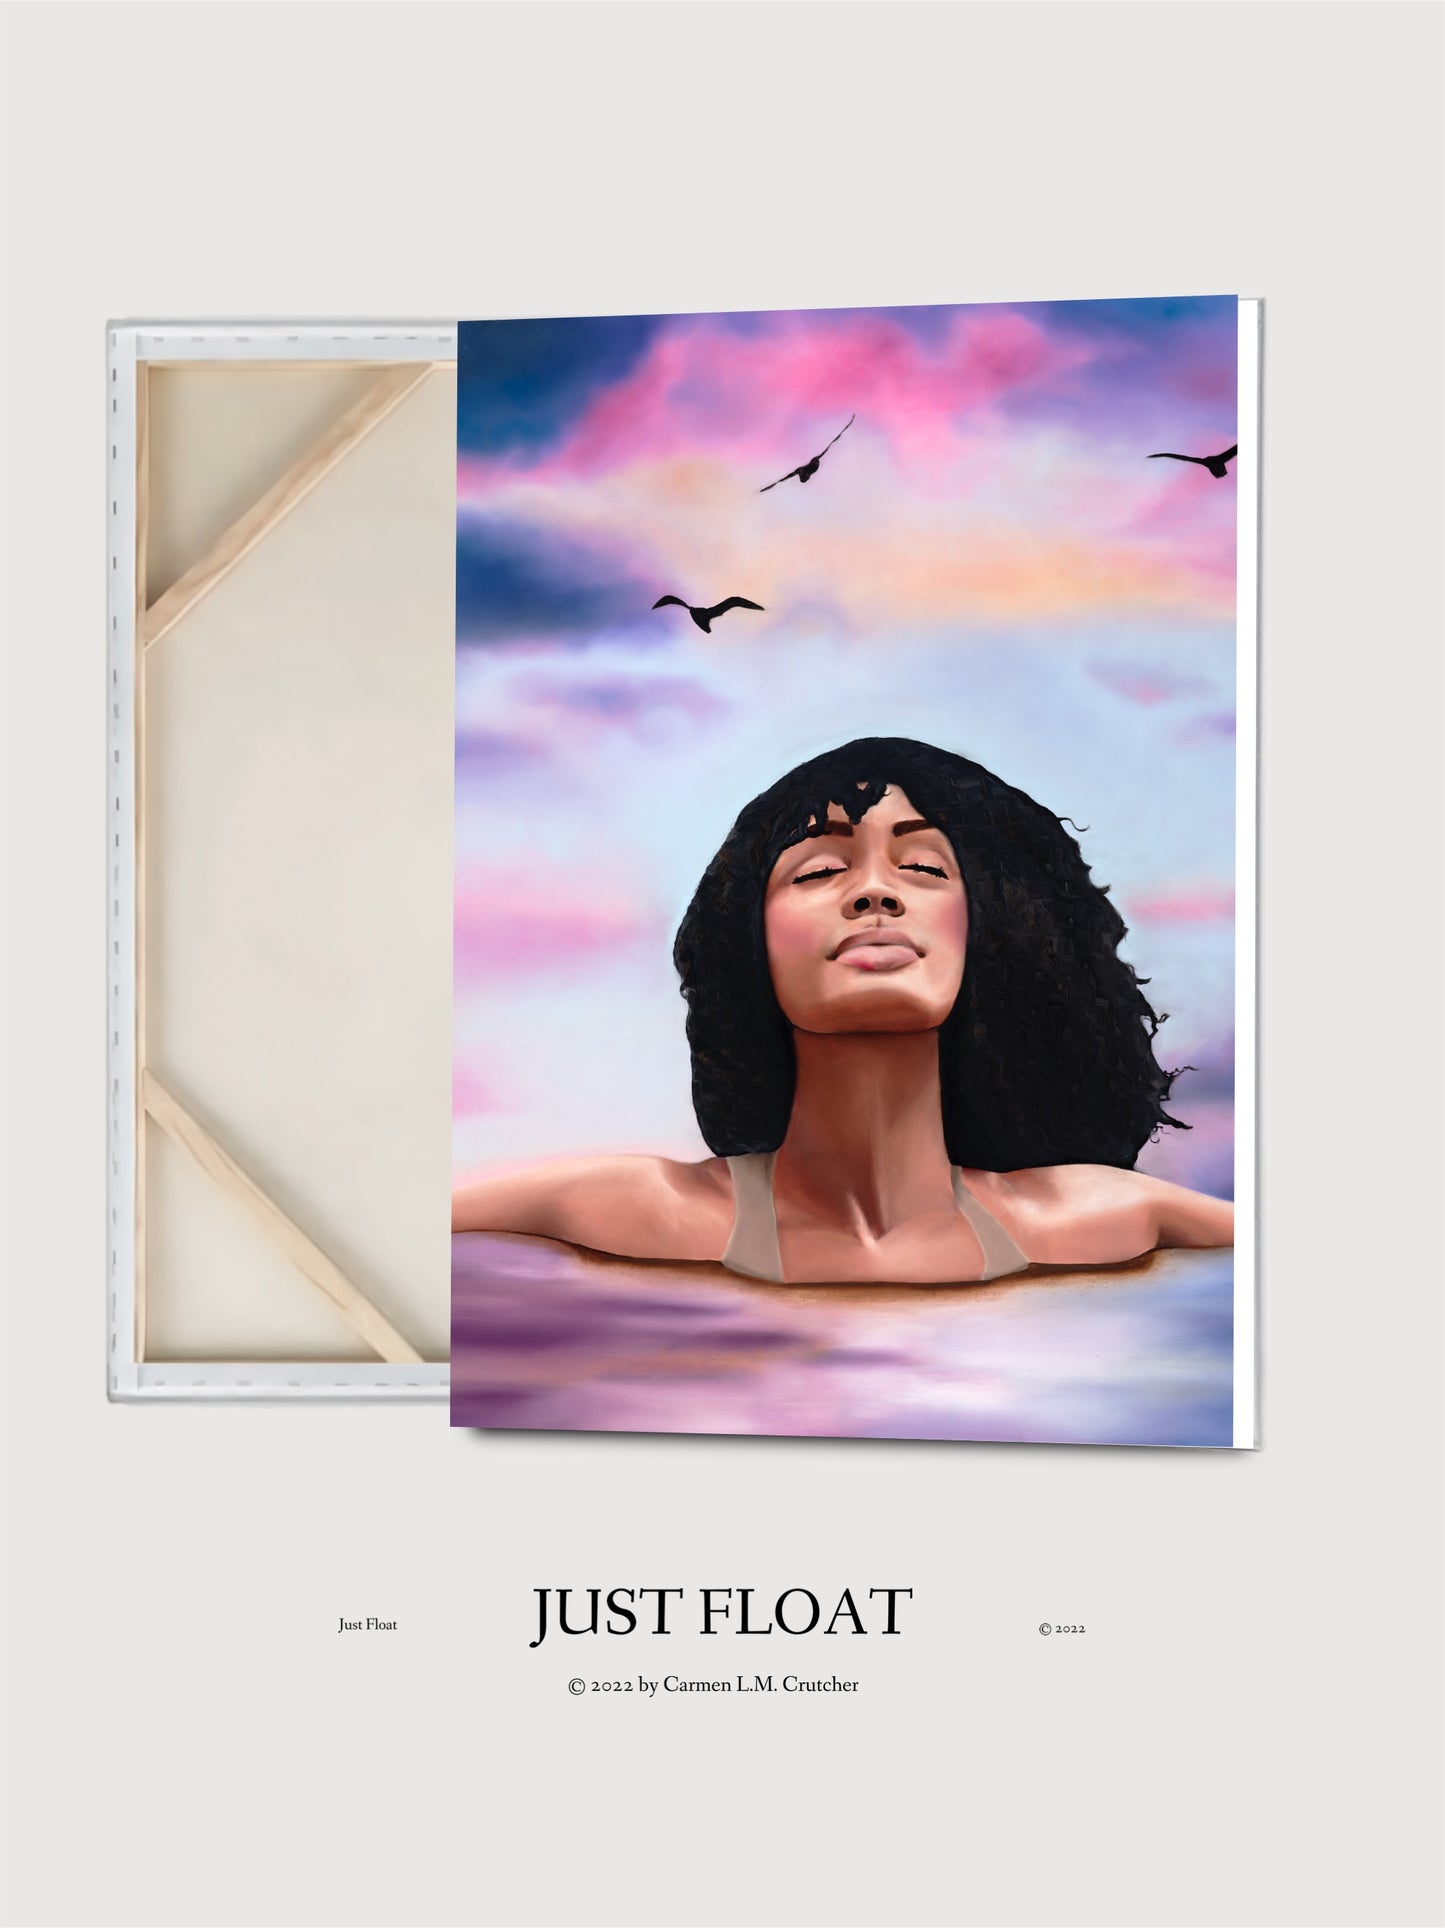 “Just Float”